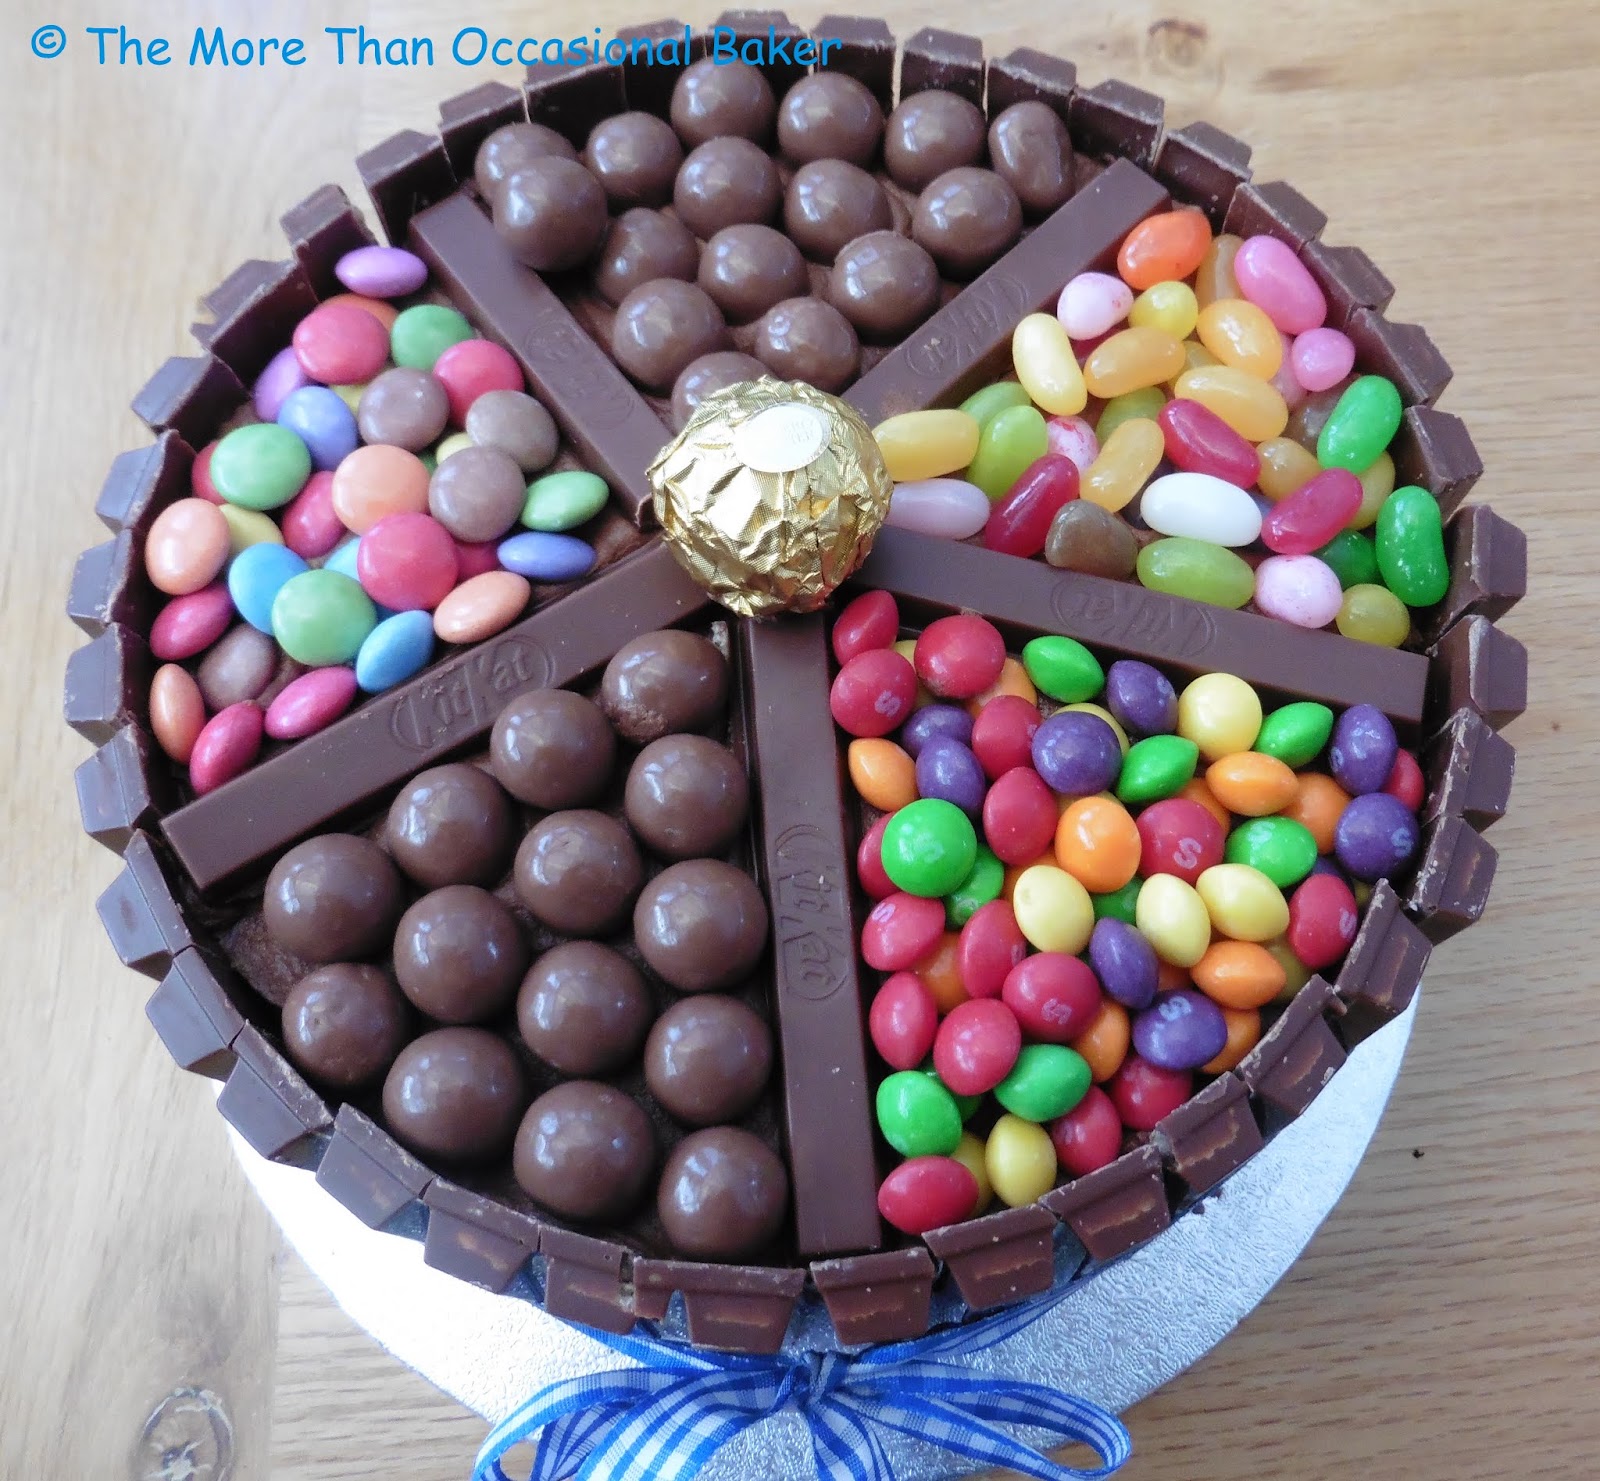 Brand New M&ms Fudge Brownie Candy Wrapper Up-cycled -  UK